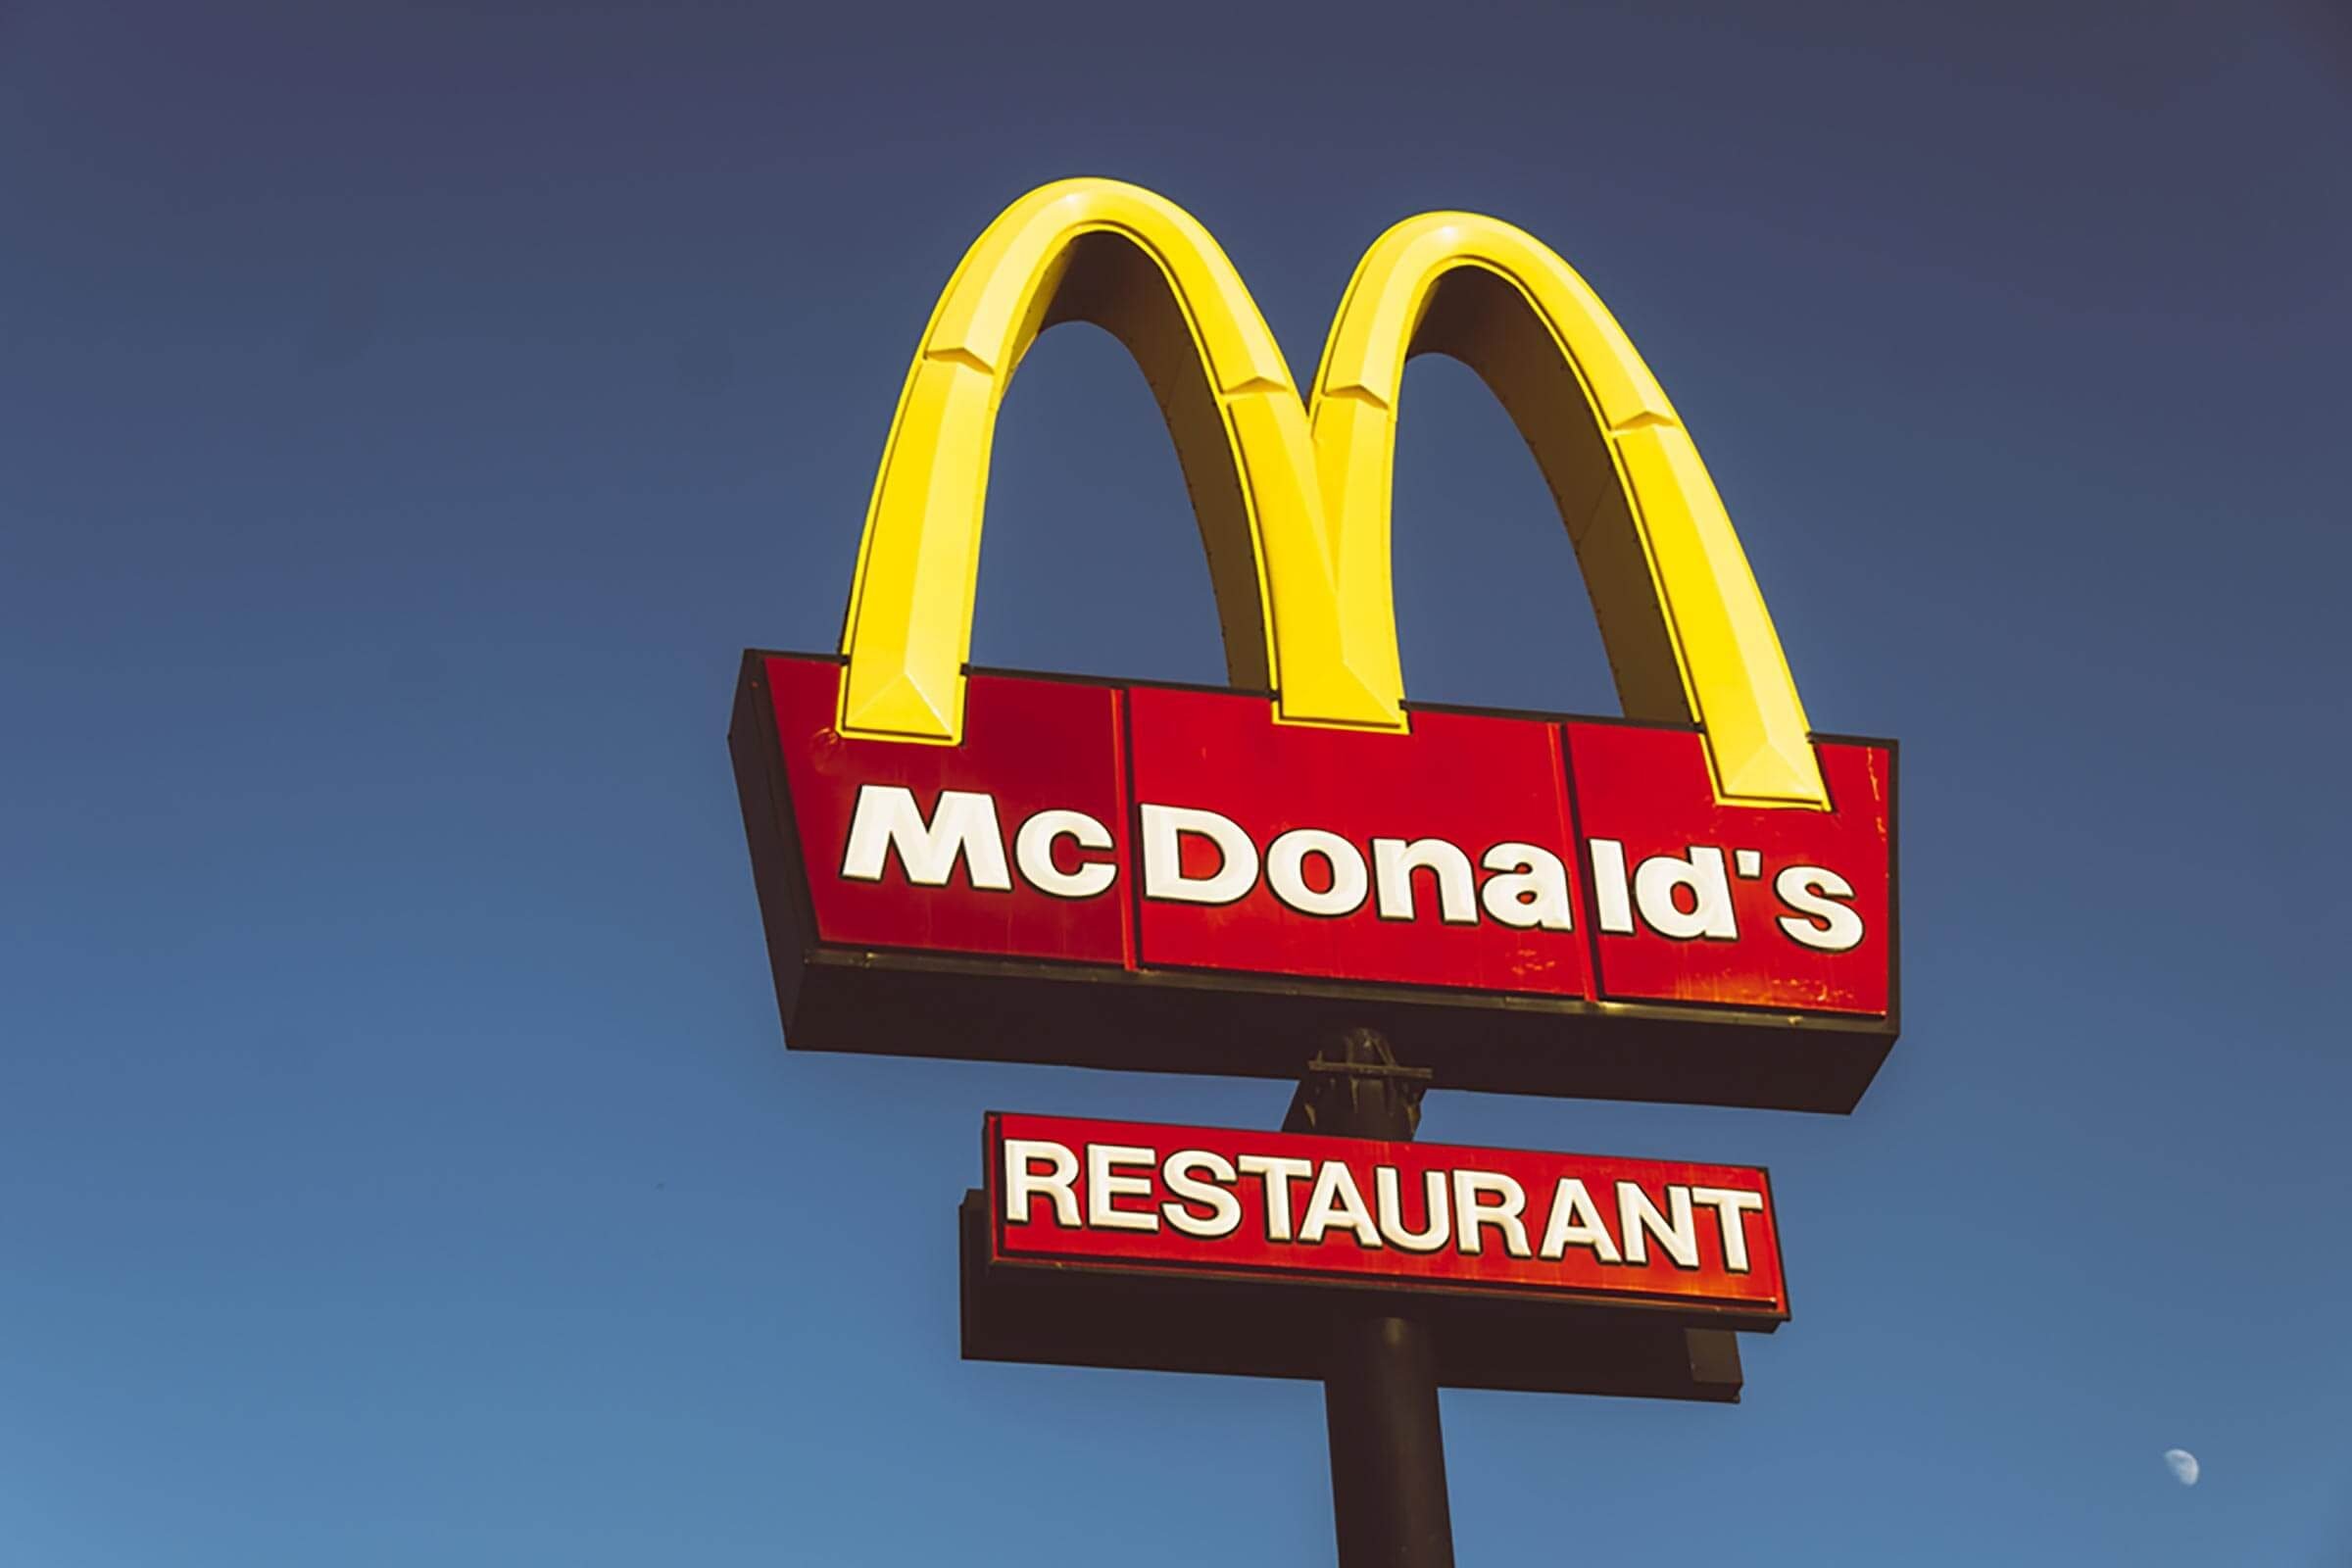 01_arches_mcdonald-s-golden-arches-have-a-hidden-sexual-meaning_691789705_longjon.jpg